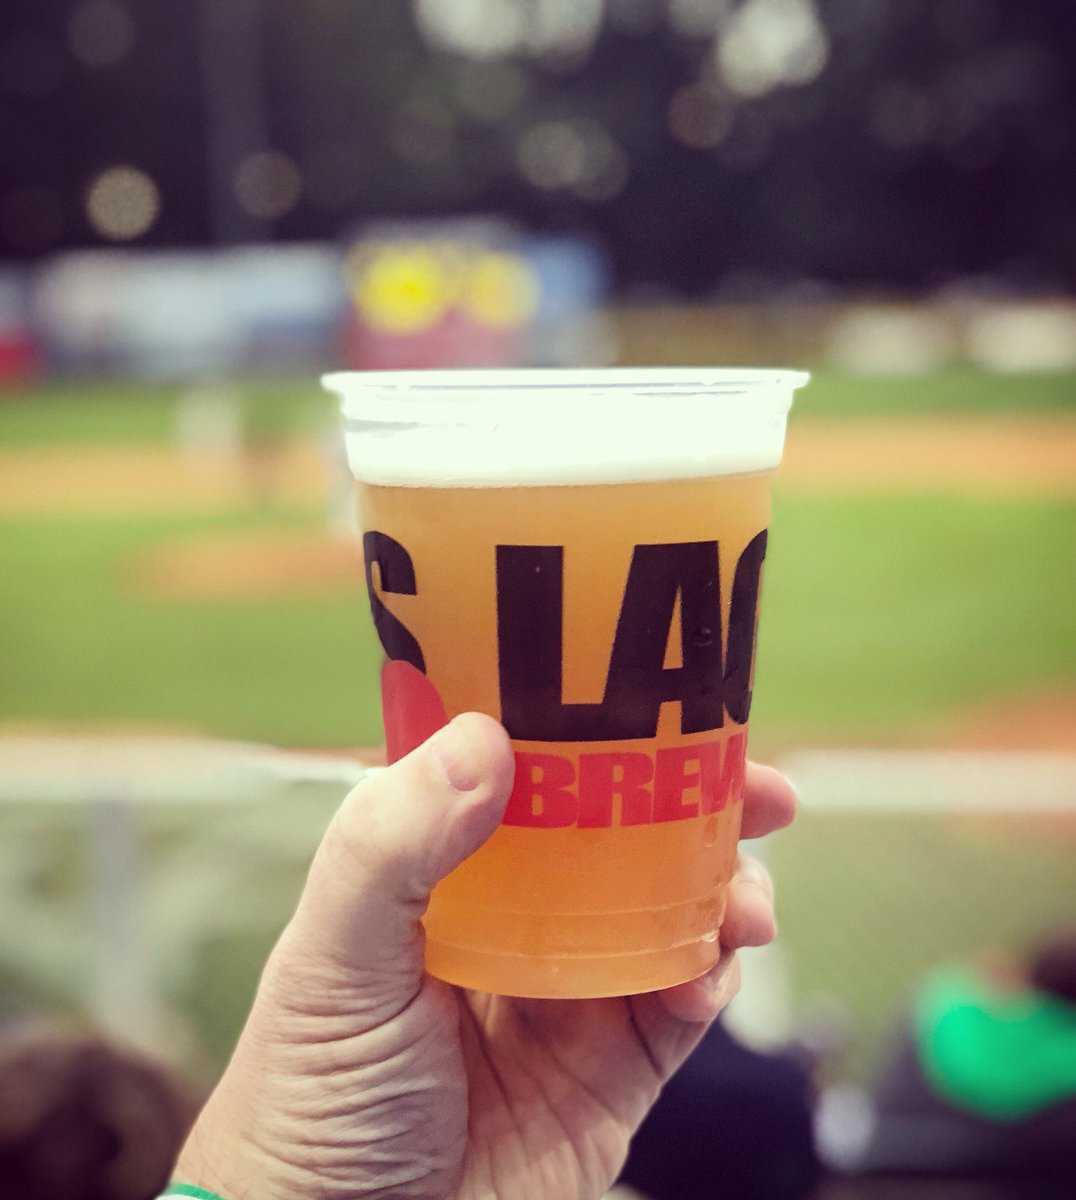 Enjoying a pickle infused beer from @cointossbrewing at a @picklesbaseball game ⚾️ 🍺 
#PortlandPickles #CoinTossBrewing
#Portland #PDX #Baseball